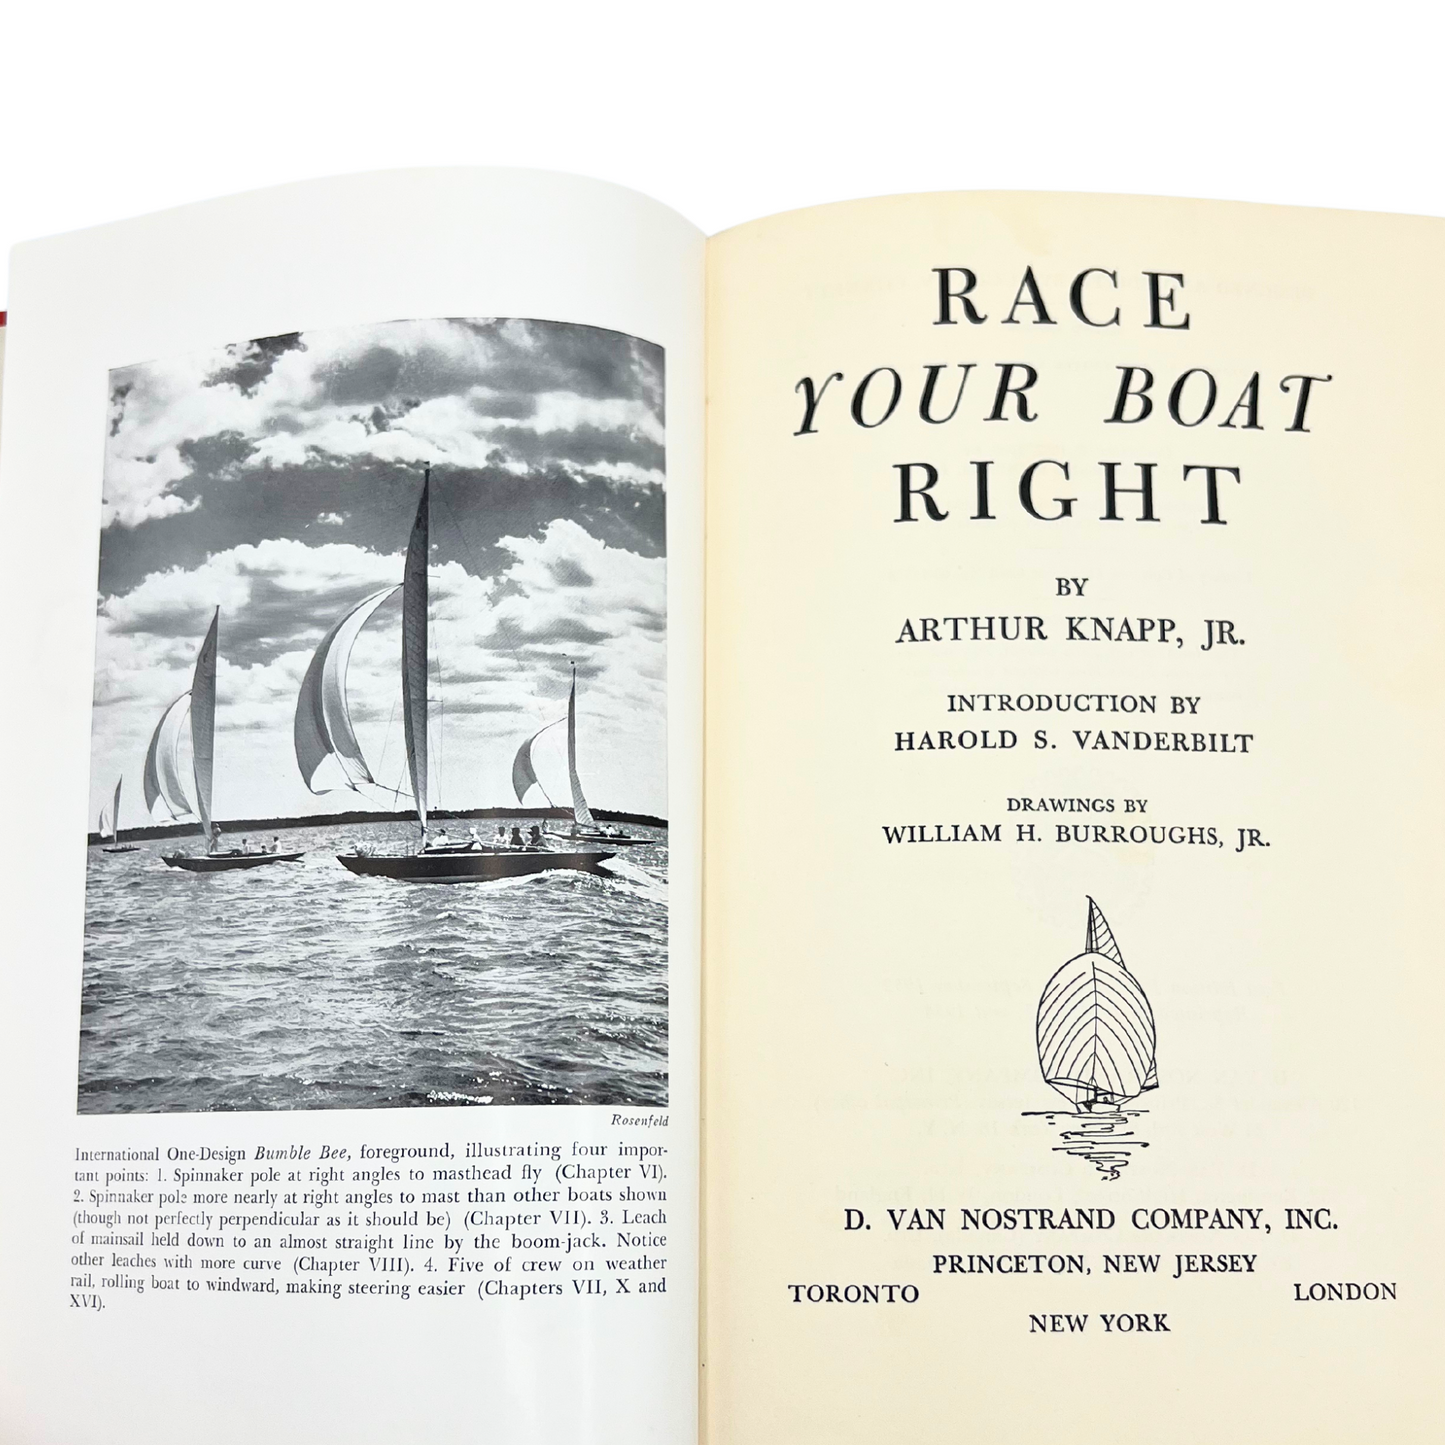 1952 book: Race Your Boat Right